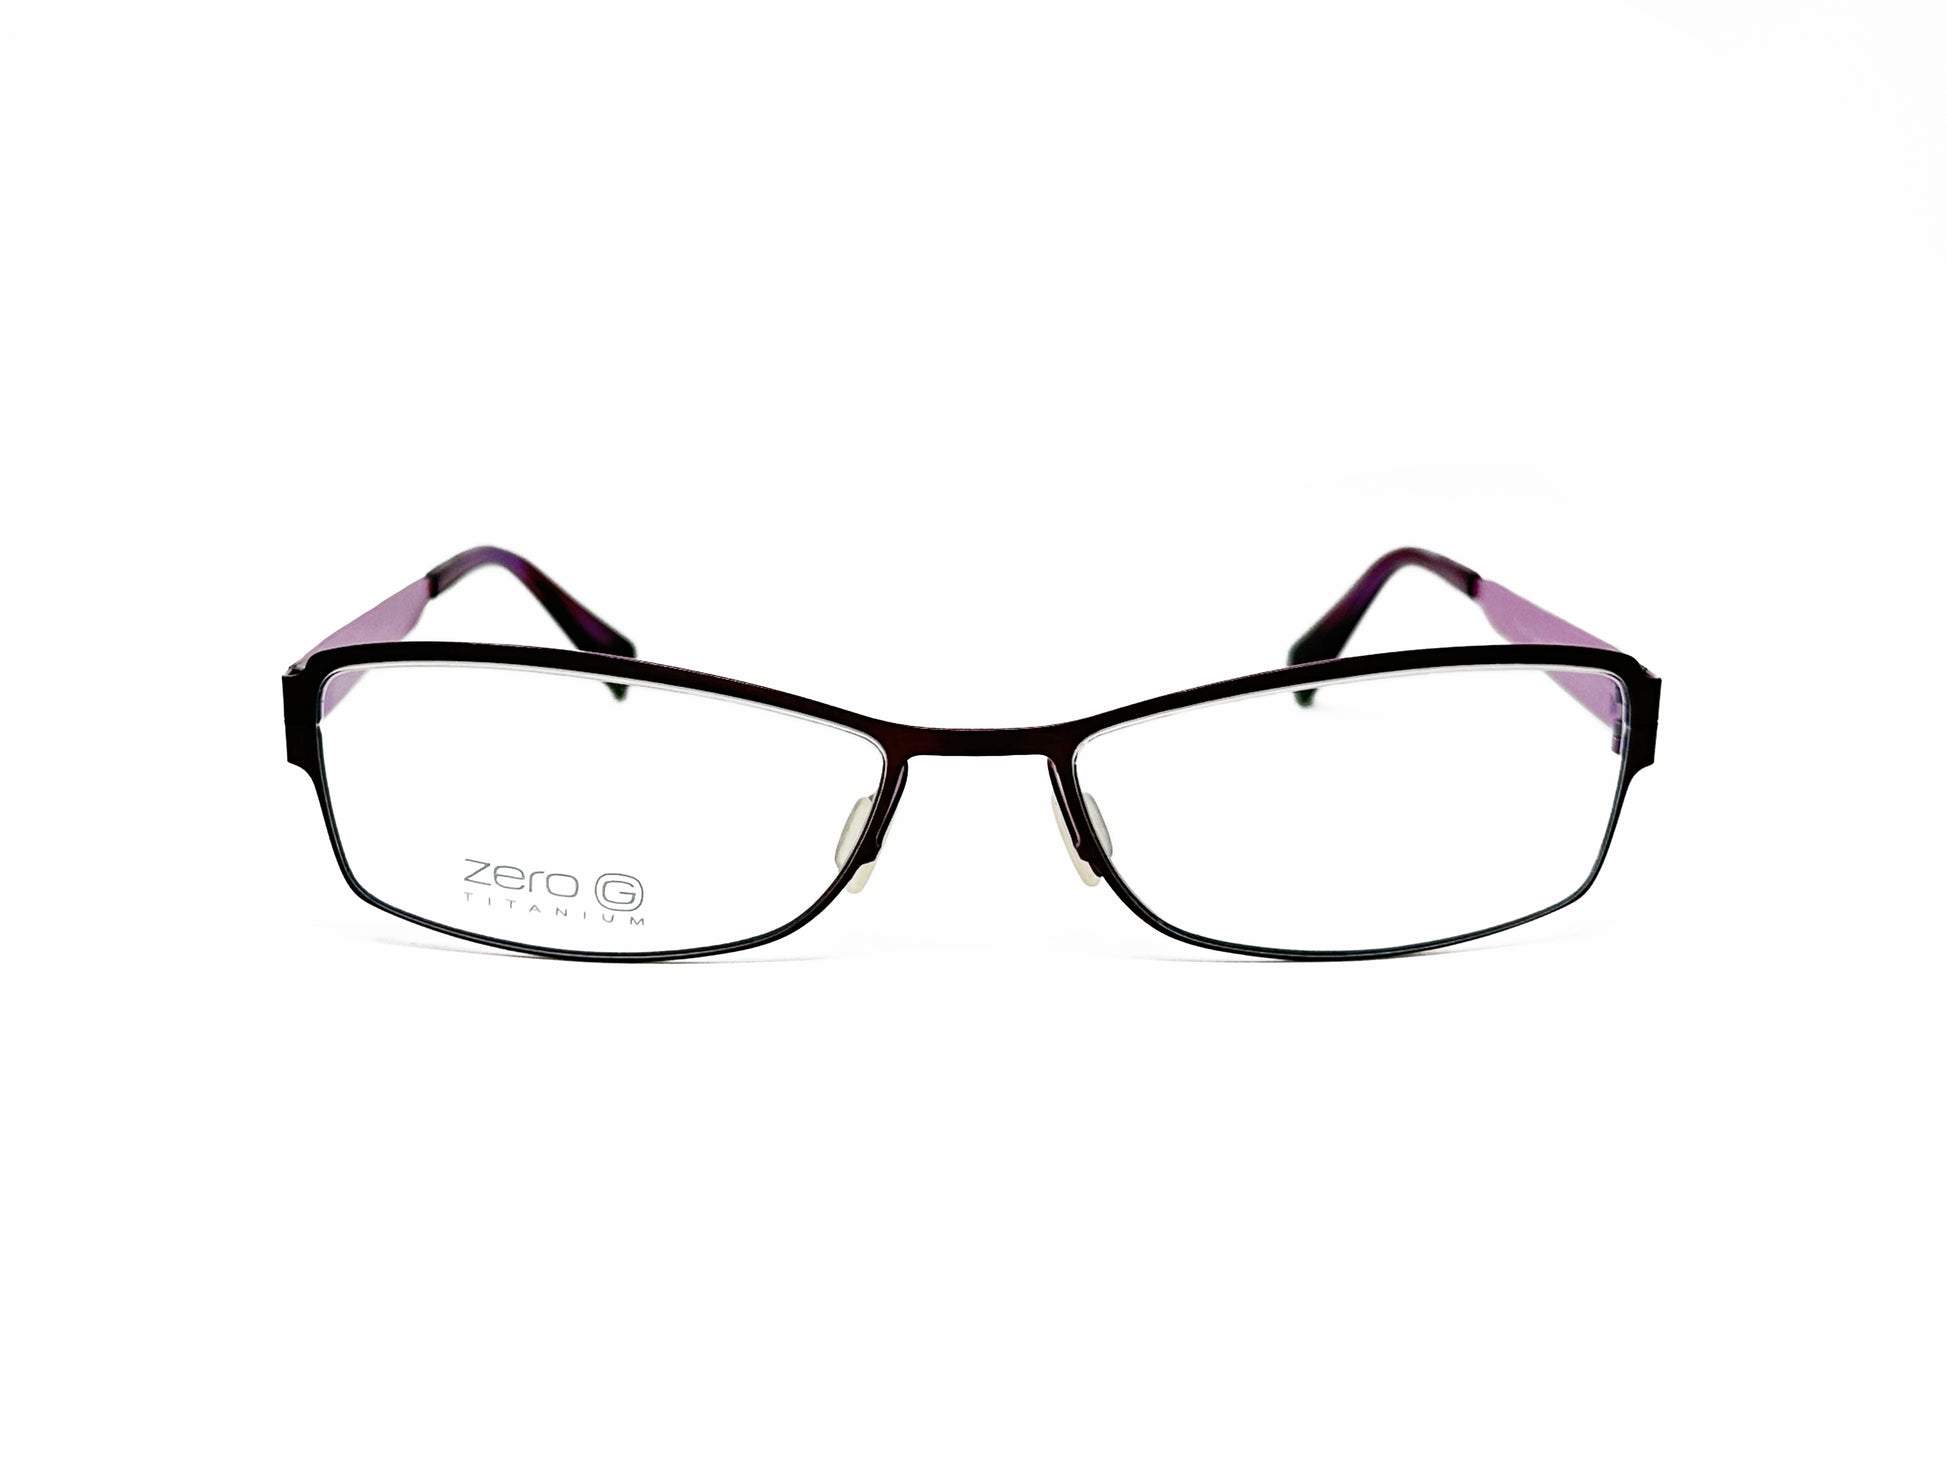 Zero G thin, curved, rectangular, titanium, optical frame. Model: Roslyn. Color: Purple/Violet. Front view. 